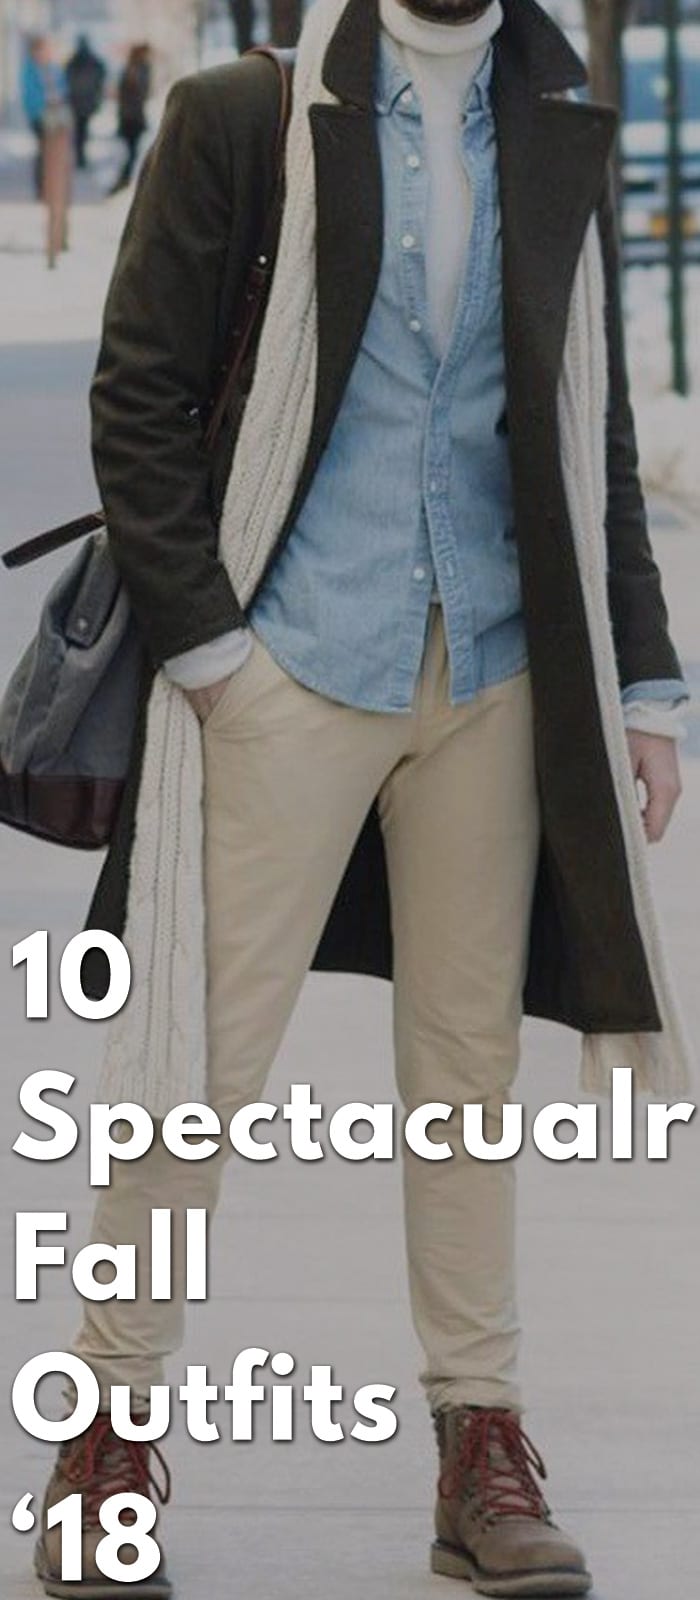 10-Spectacualr-Fall-Outfits-‘18